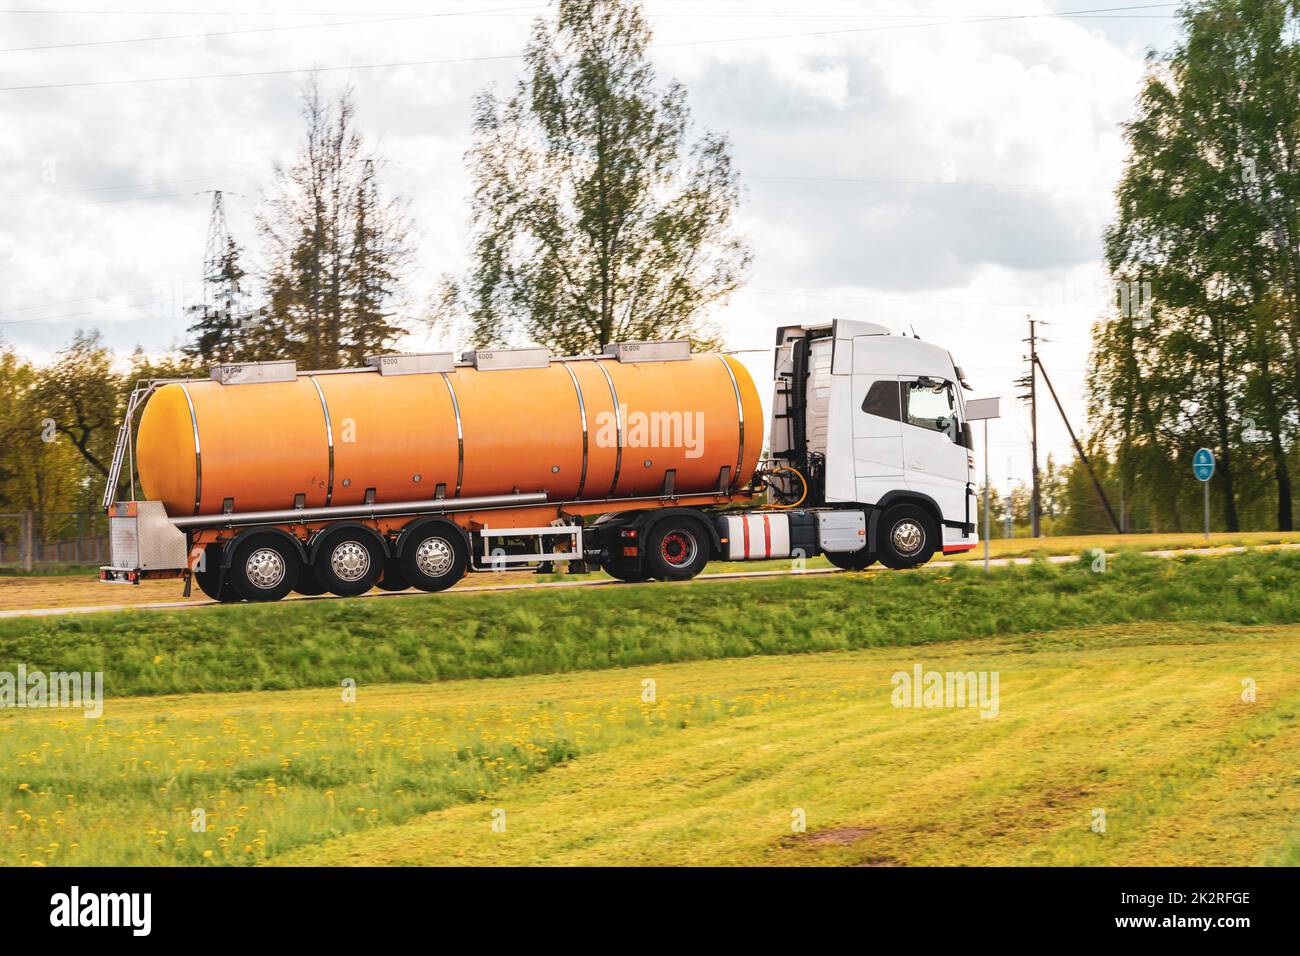 Truck with orange tanker on a road Stock Photo